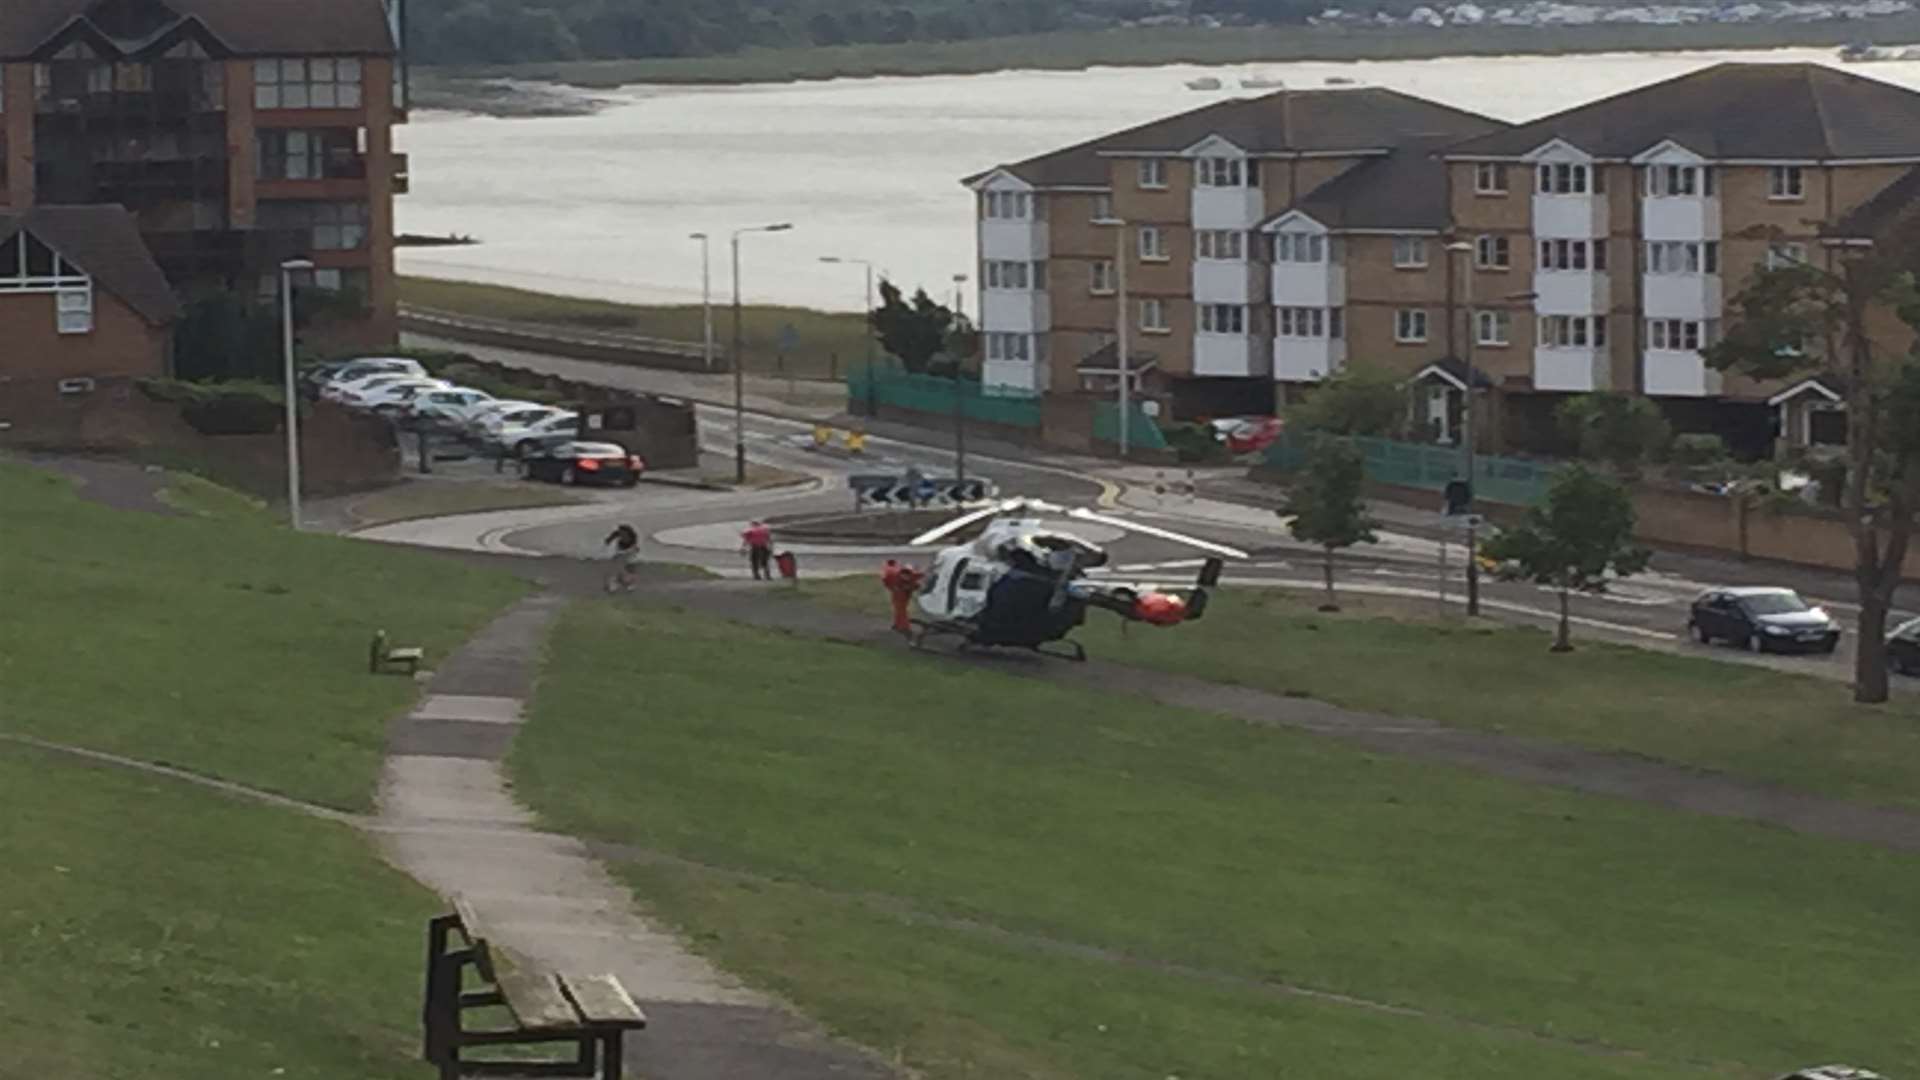 Air ambulance medics made their way to the scene